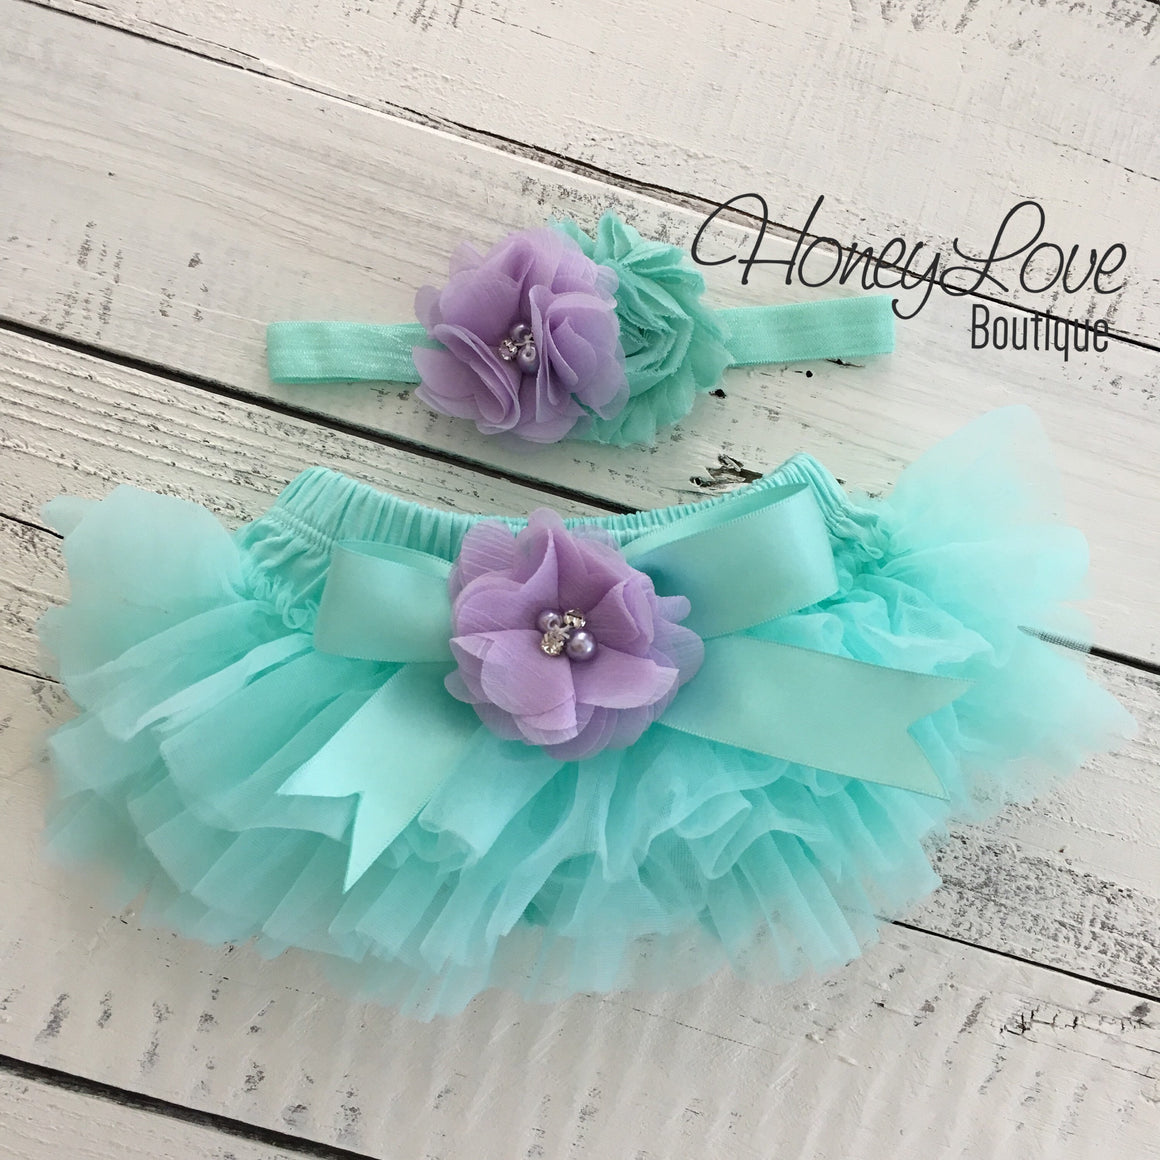 One - Birthday Outfit - Mint/Aqua, Lavender Purple and Silver/Gold glitter - embellished tutu skirt bloomers - HoneyLoveBoutique